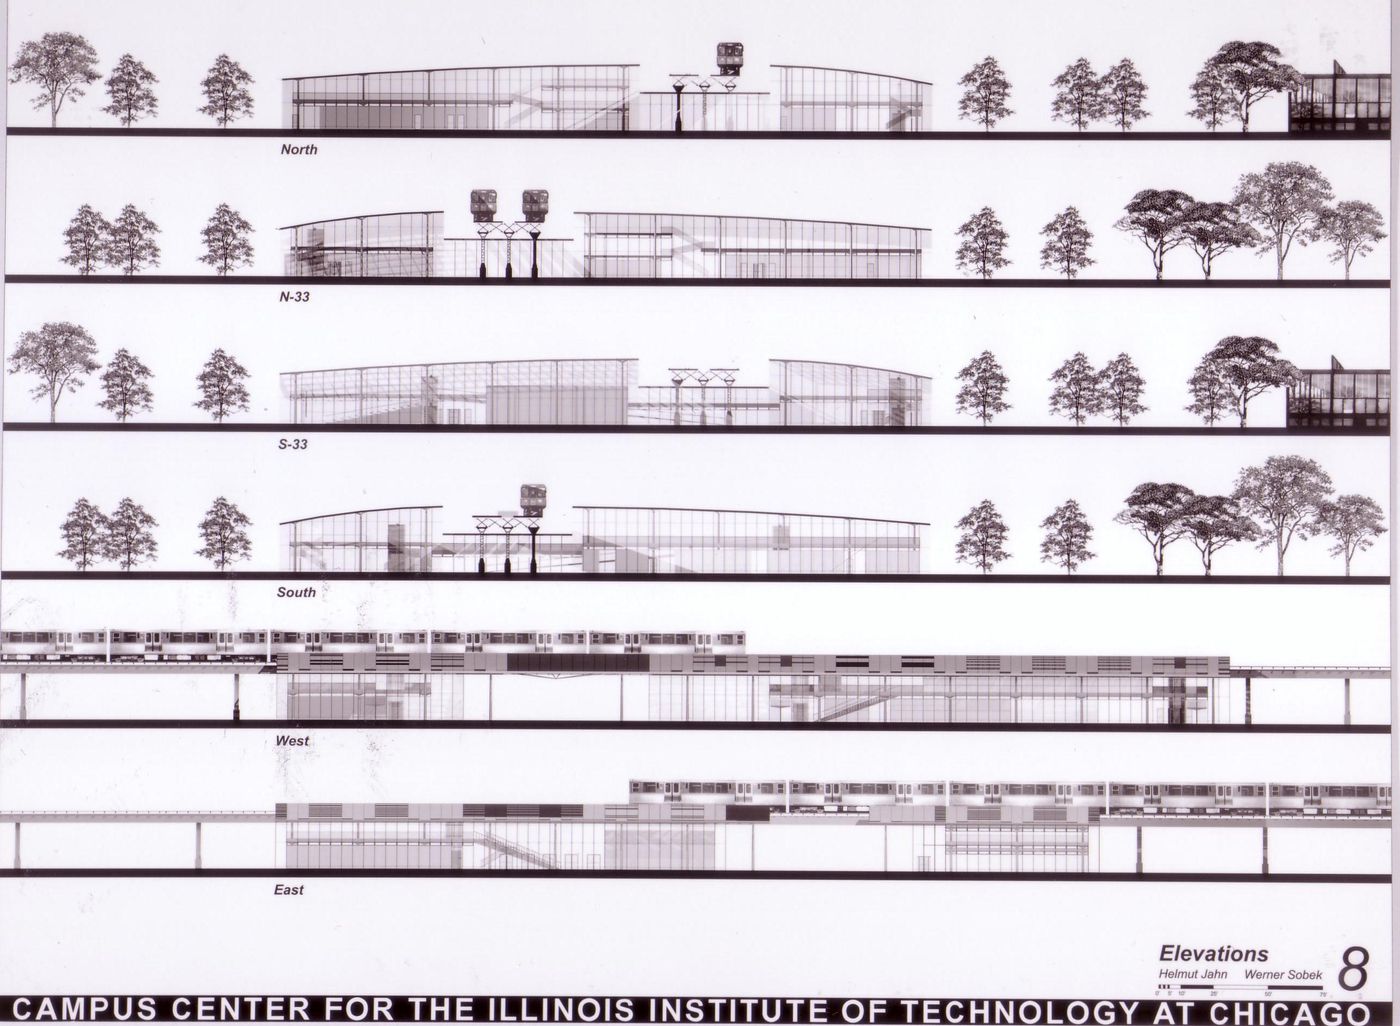 Elevations, submission to the Richard H. Driehaus Foundation International Design Competition for a new campus center (1997-98), Illinois Institute of Technology, Chicago, Illinois